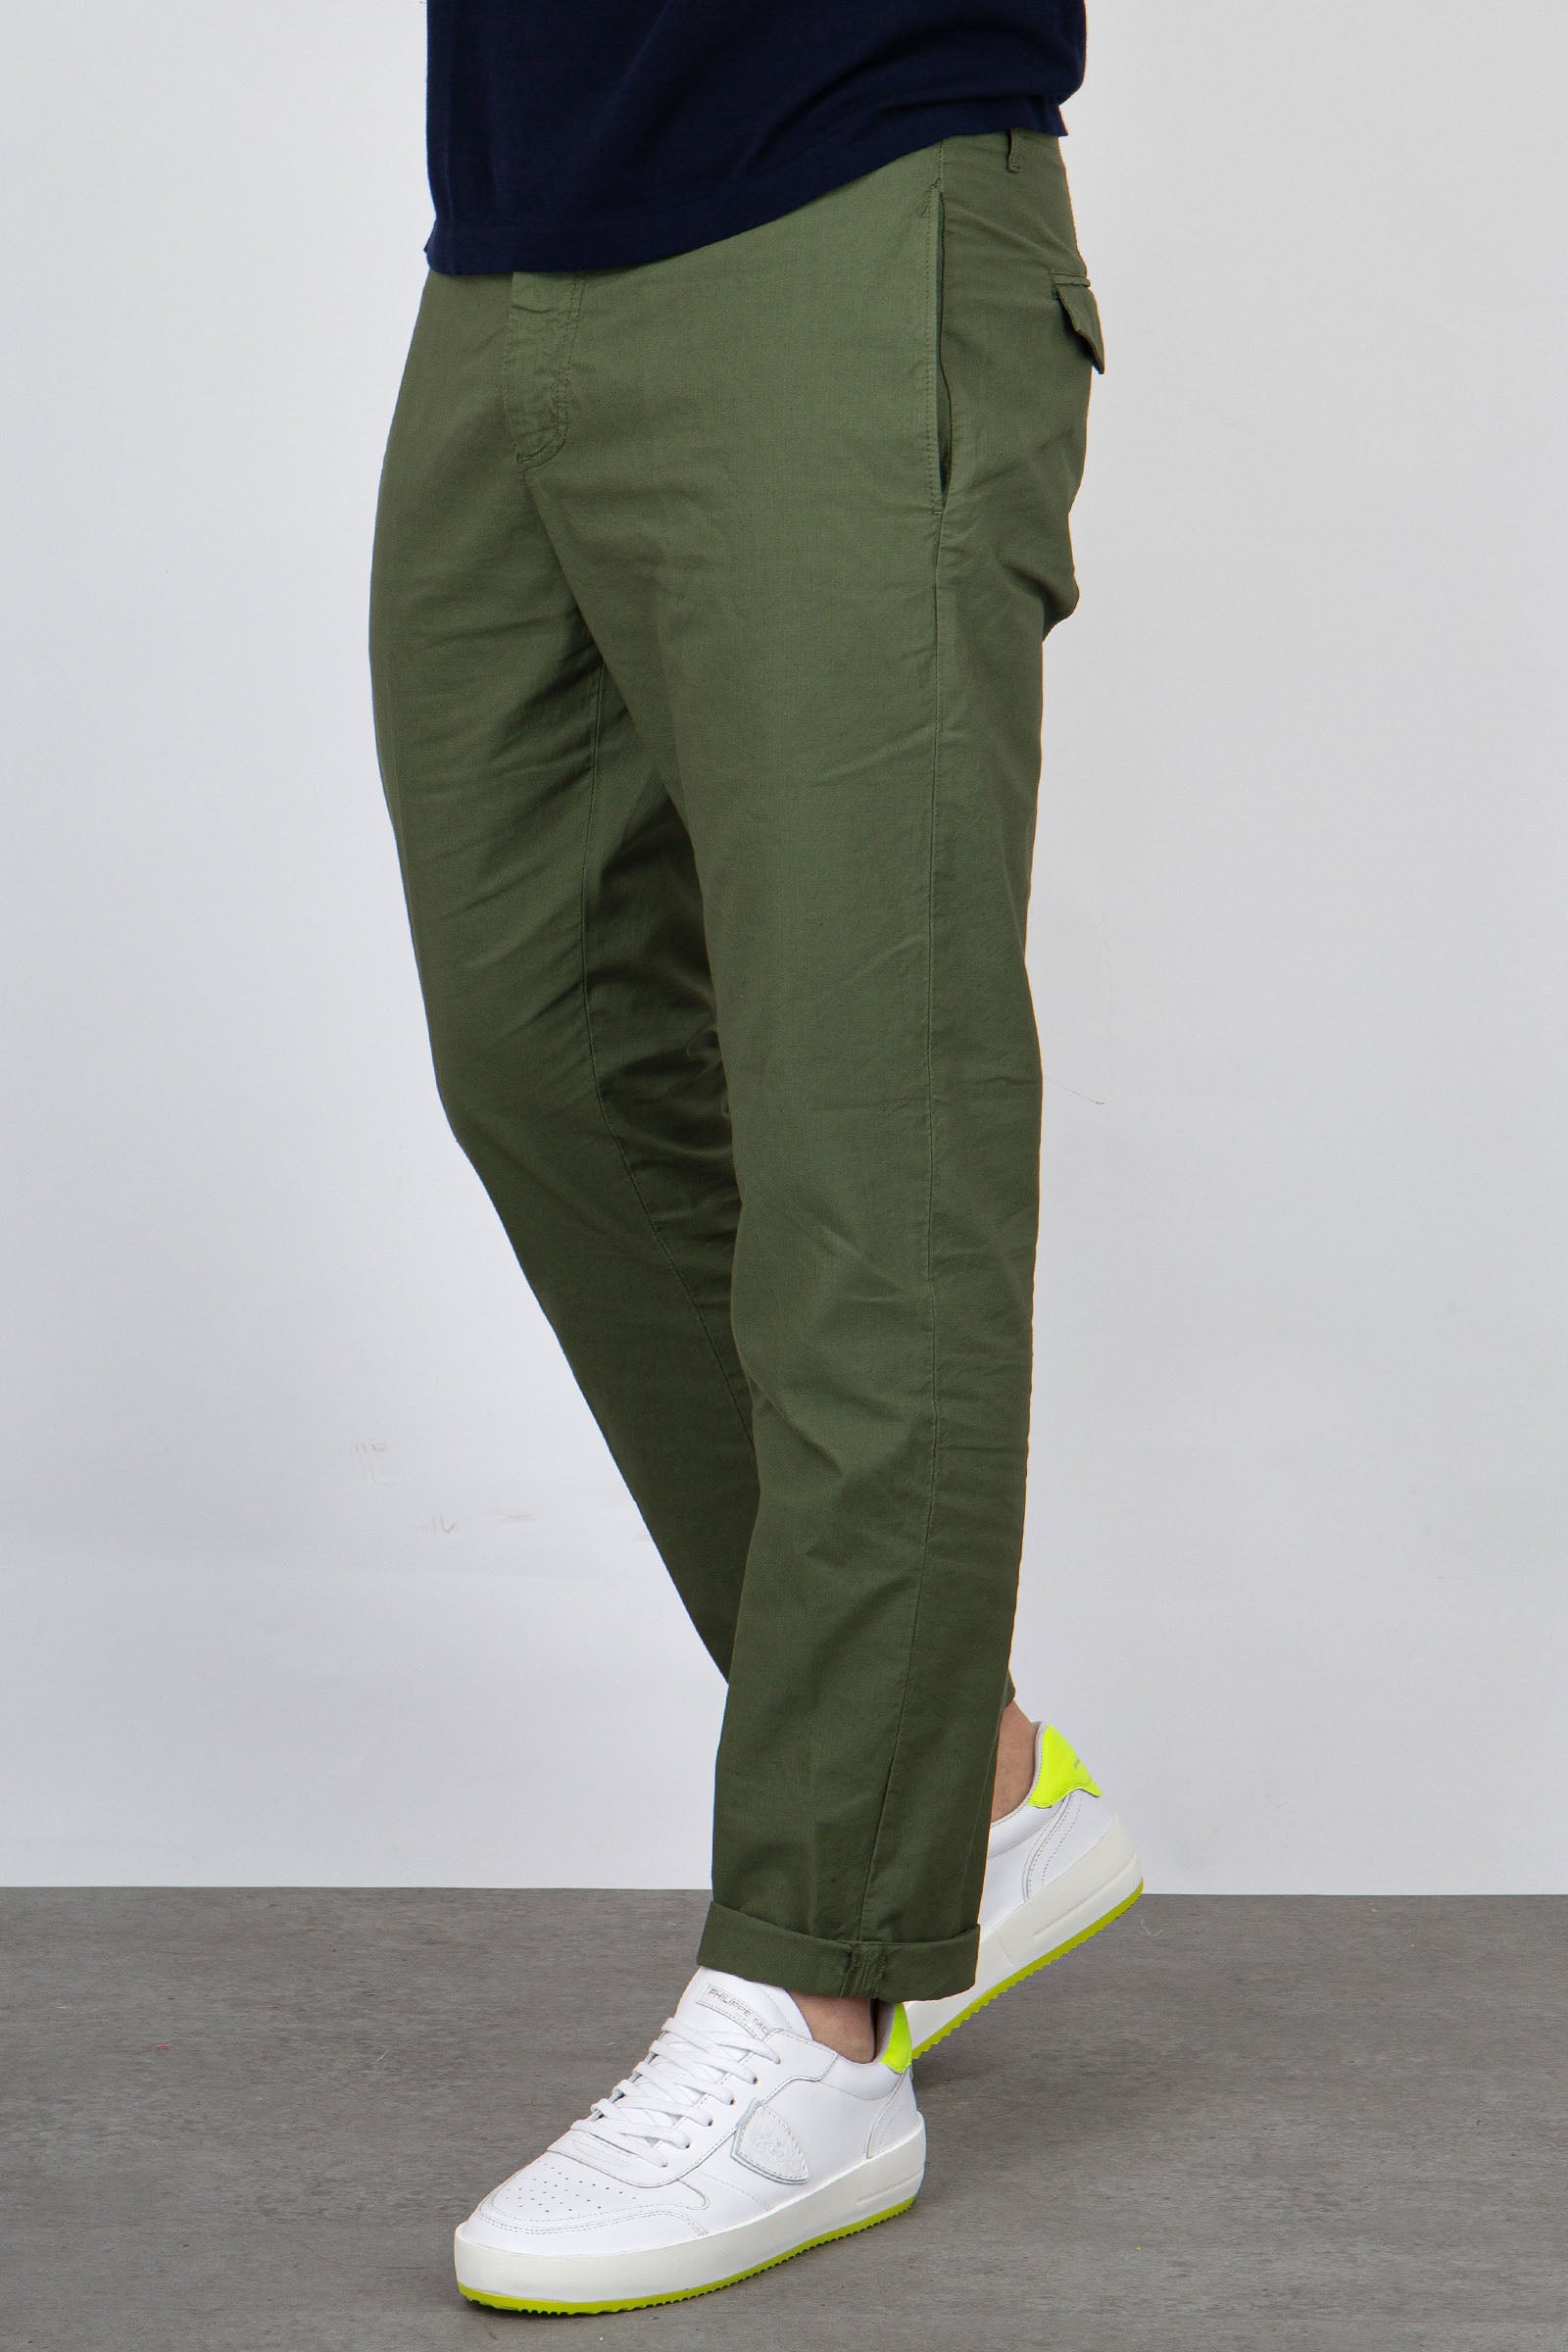 Department Five Green Military Cotton Trousers - 4